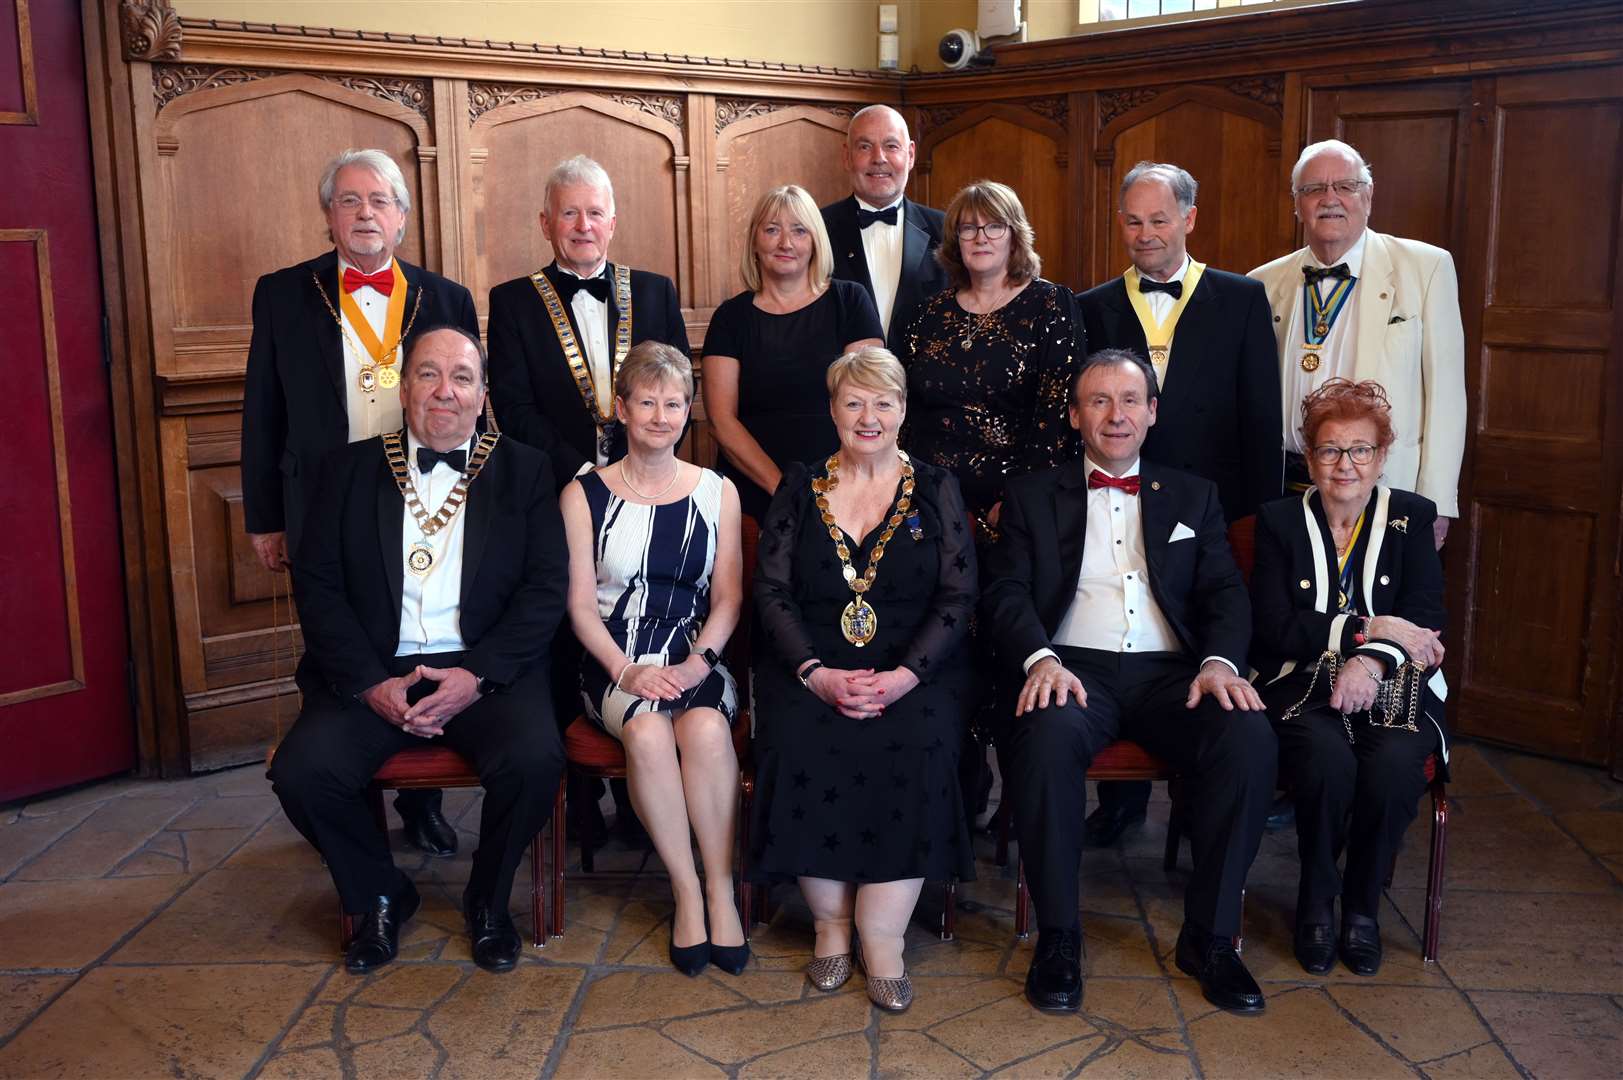 Those attending the celebratory event included past presidents and wives plus the mayor of West Norfolk, Lesley Bambridge